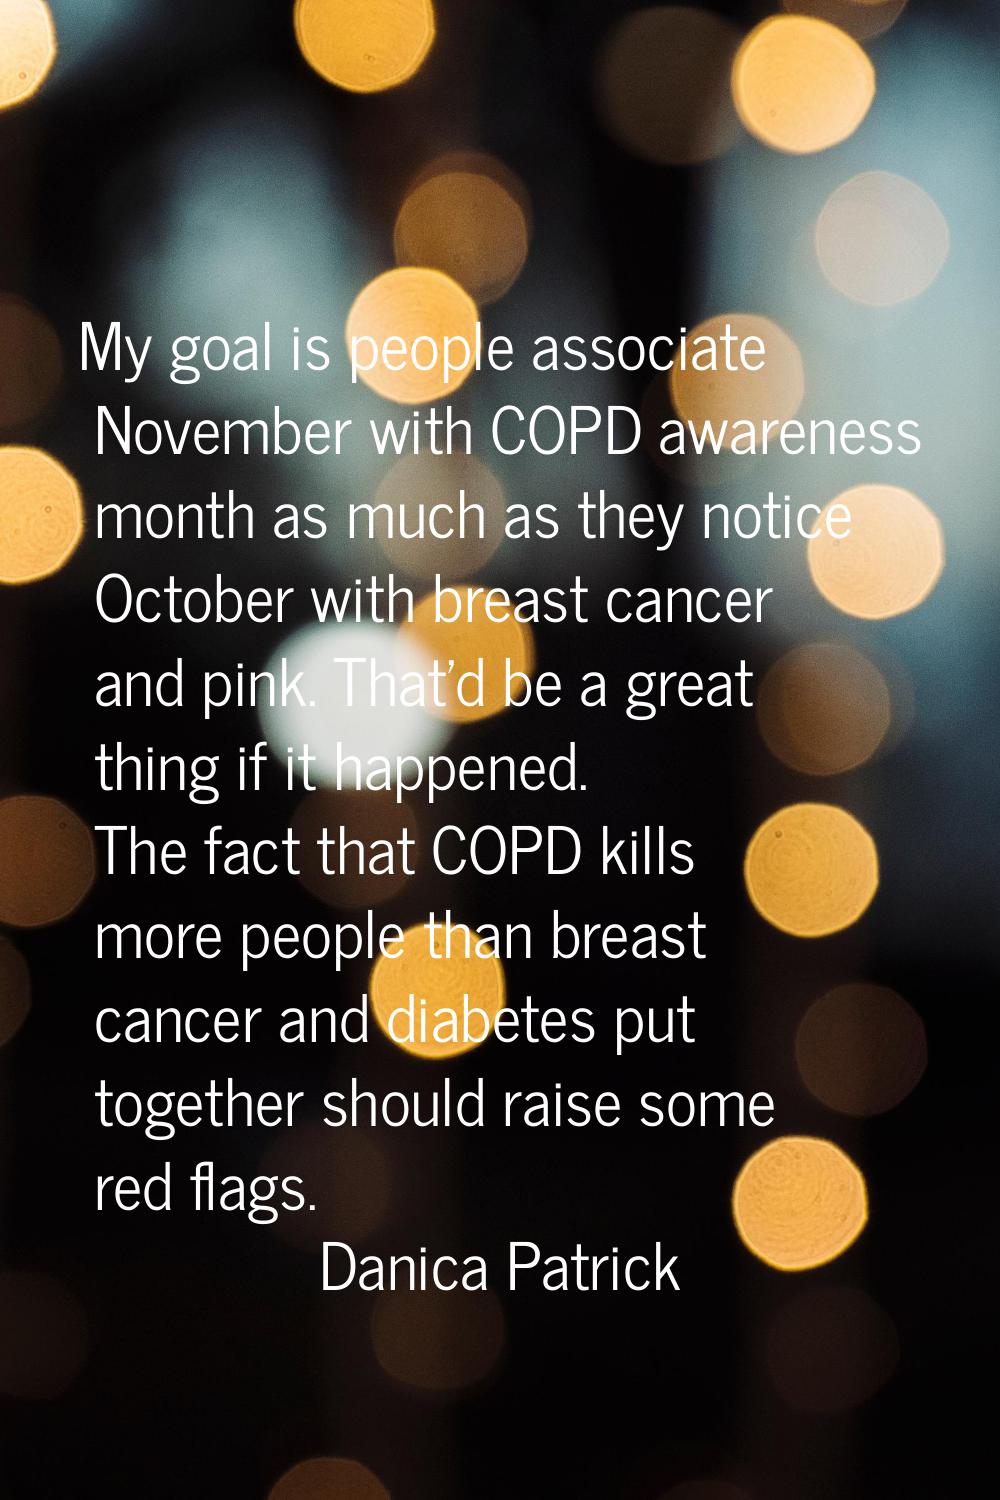 My goal is people associate November with COPD awareness month as much as they notice October with 